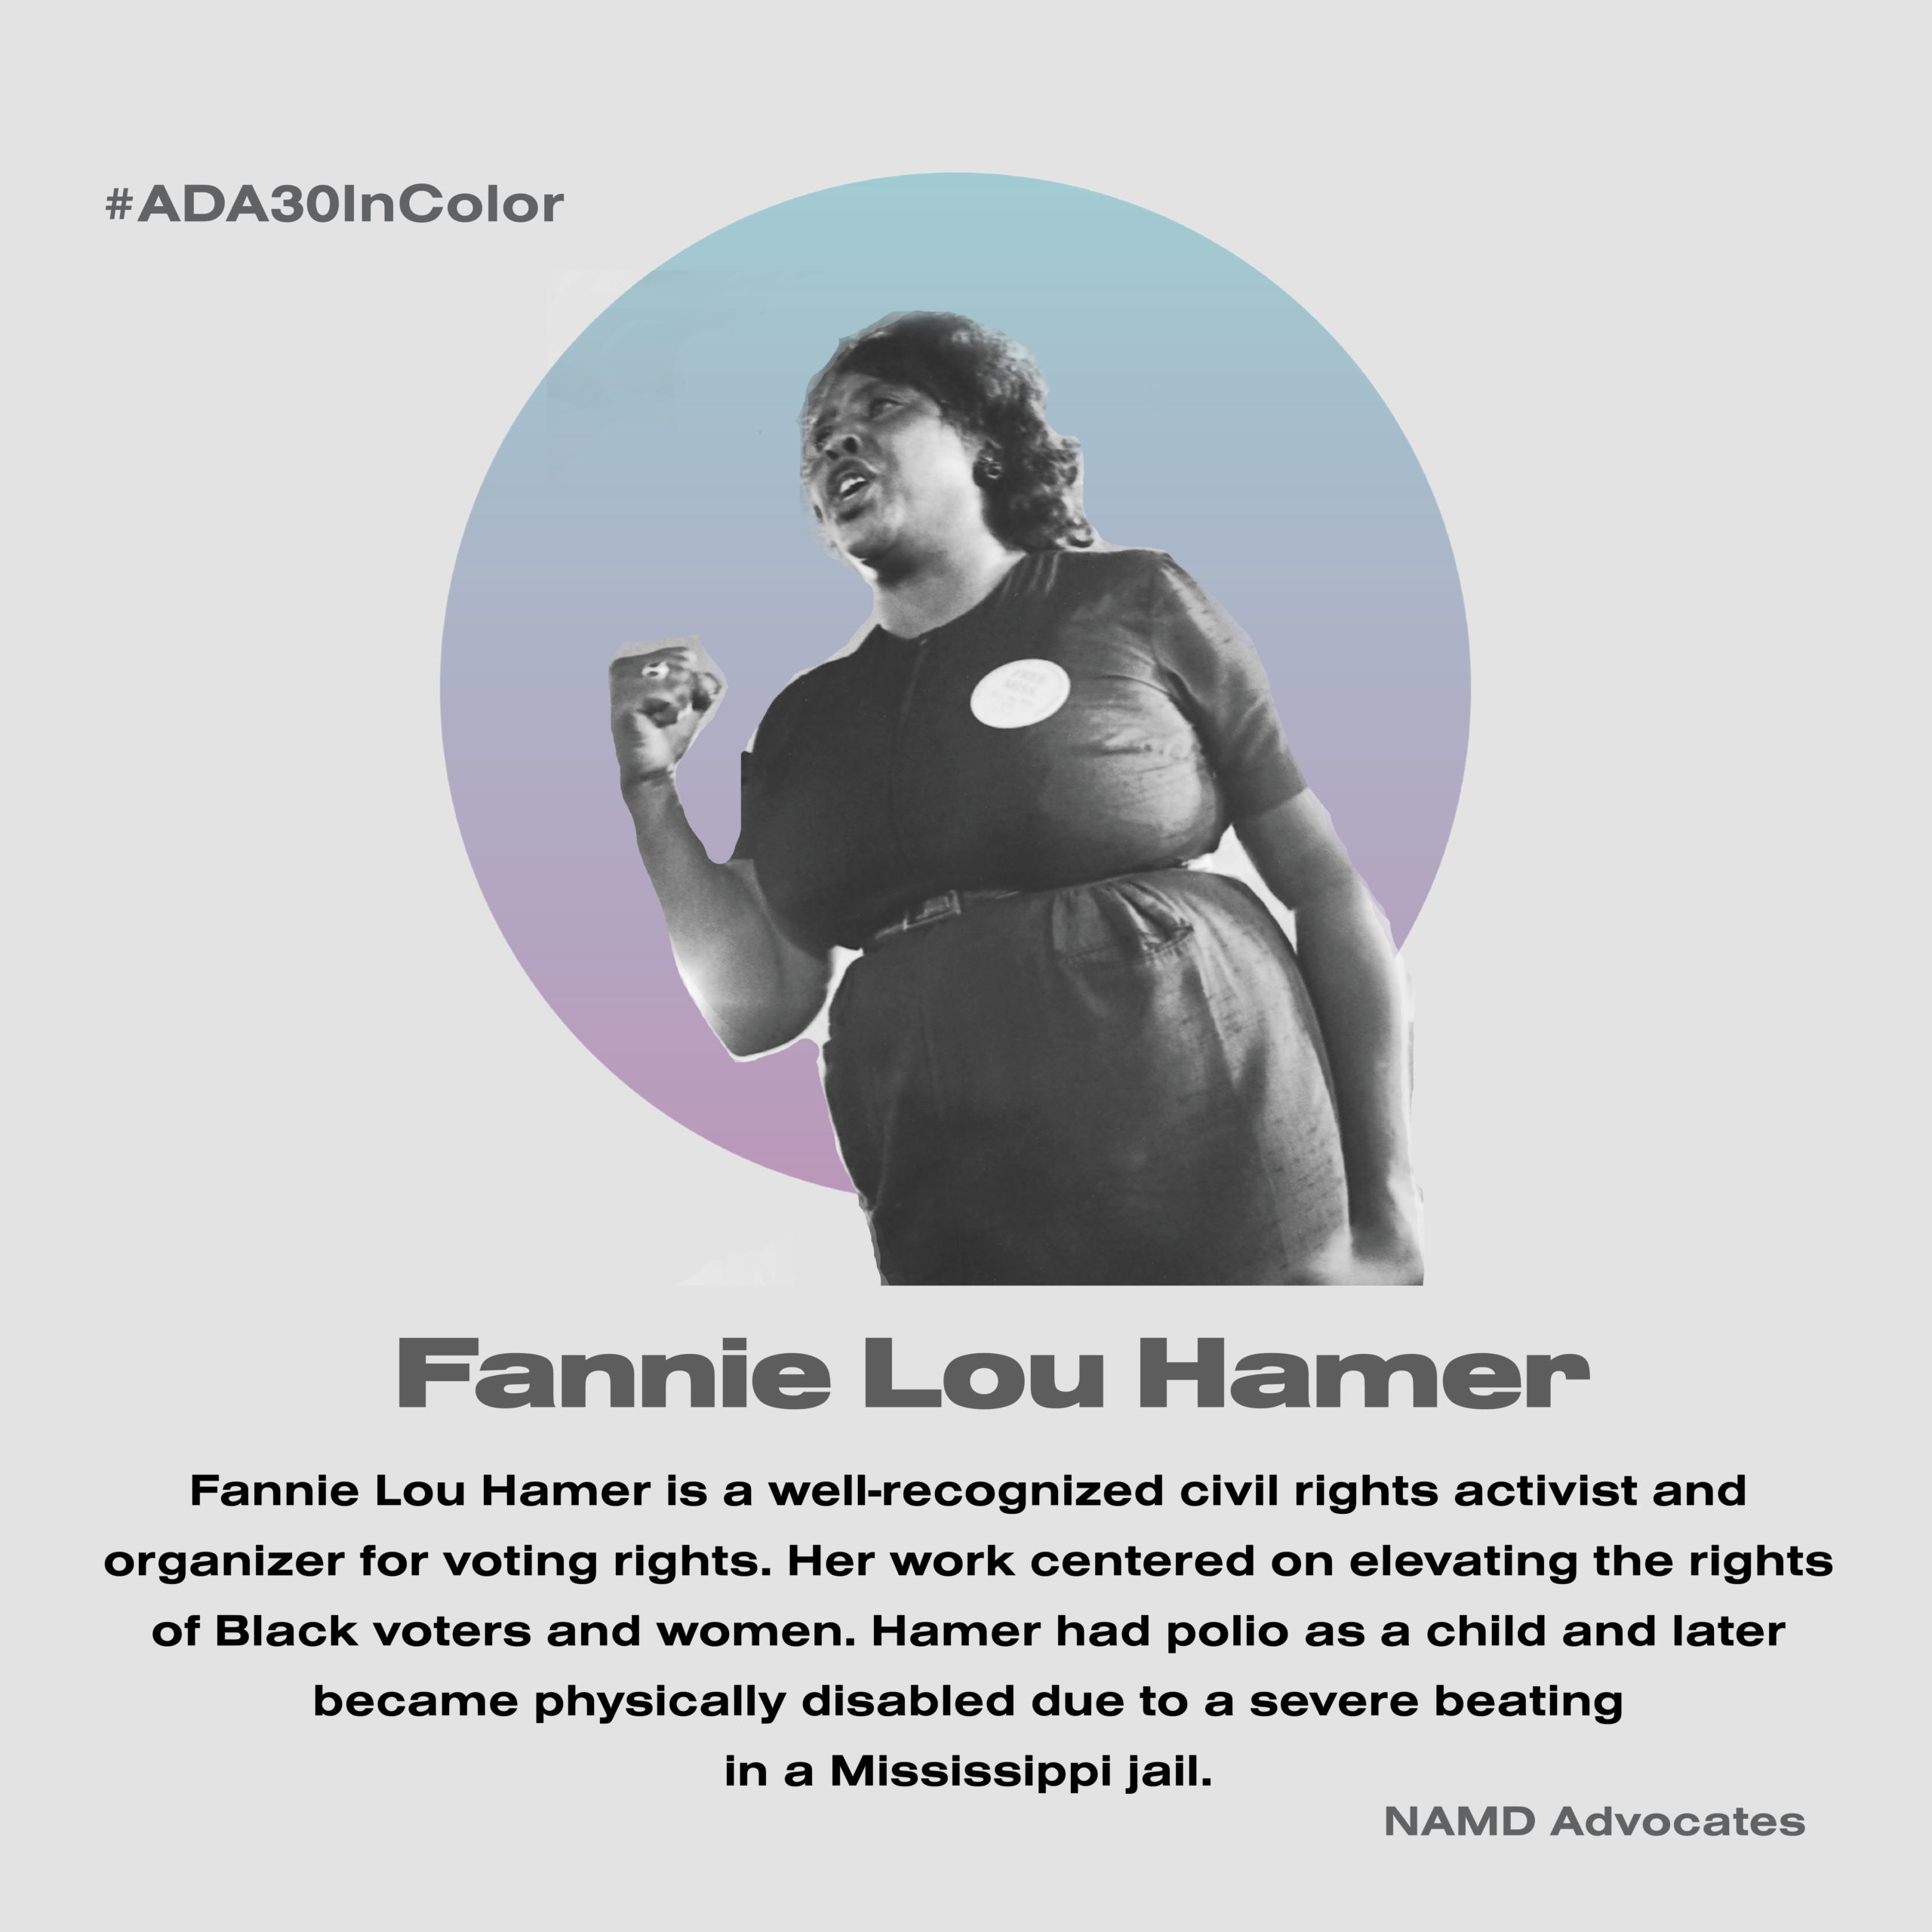 Fannie Lou Hamer is a well-recognized civil rights activists and organizer for voting rights. Her work centered on elevating the rights of Black voters and women. Hamer had polio as a child and later became physically disabled due to a severe beating in a Mississippi jail.